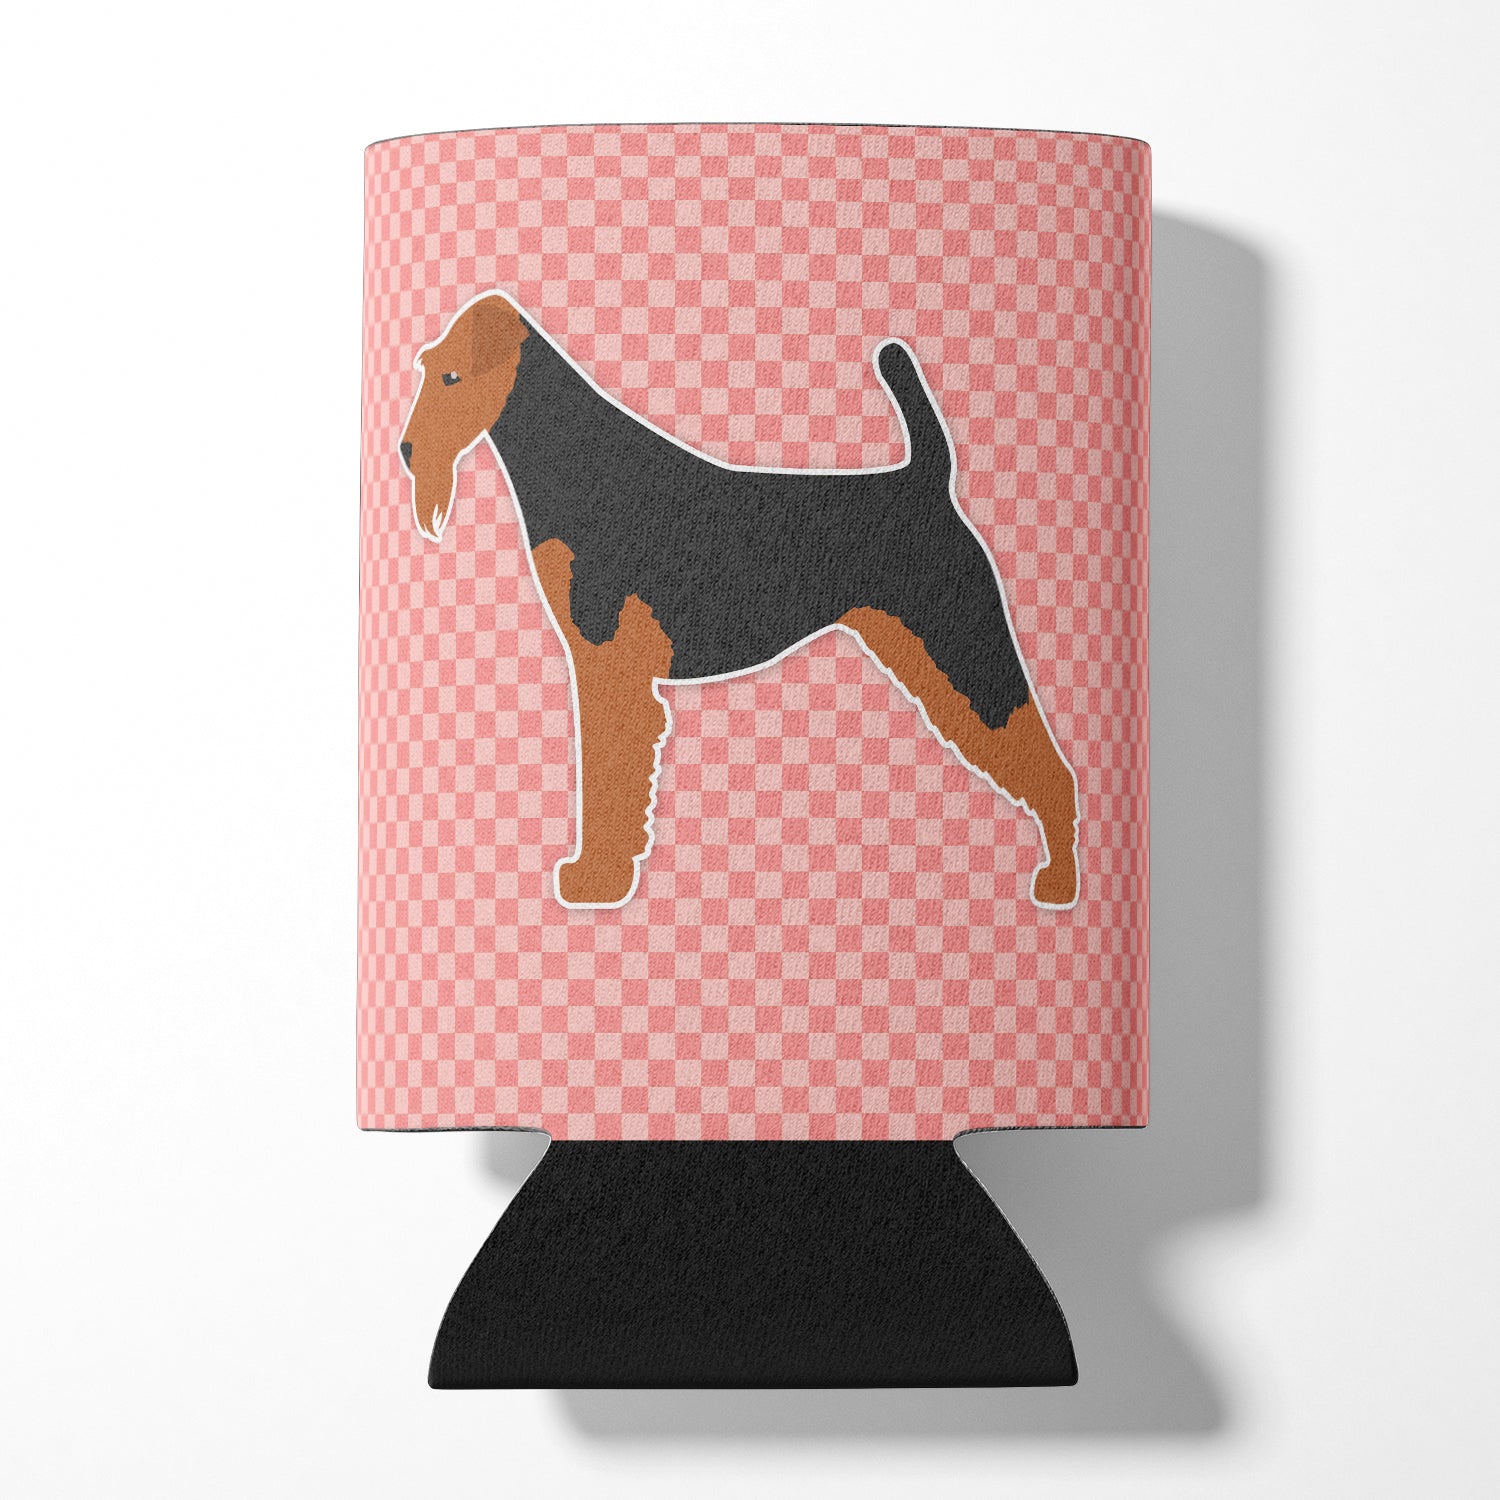 Welsh Terrier Checkerboard Rose Canette ou porte-bouteille BB3585CC